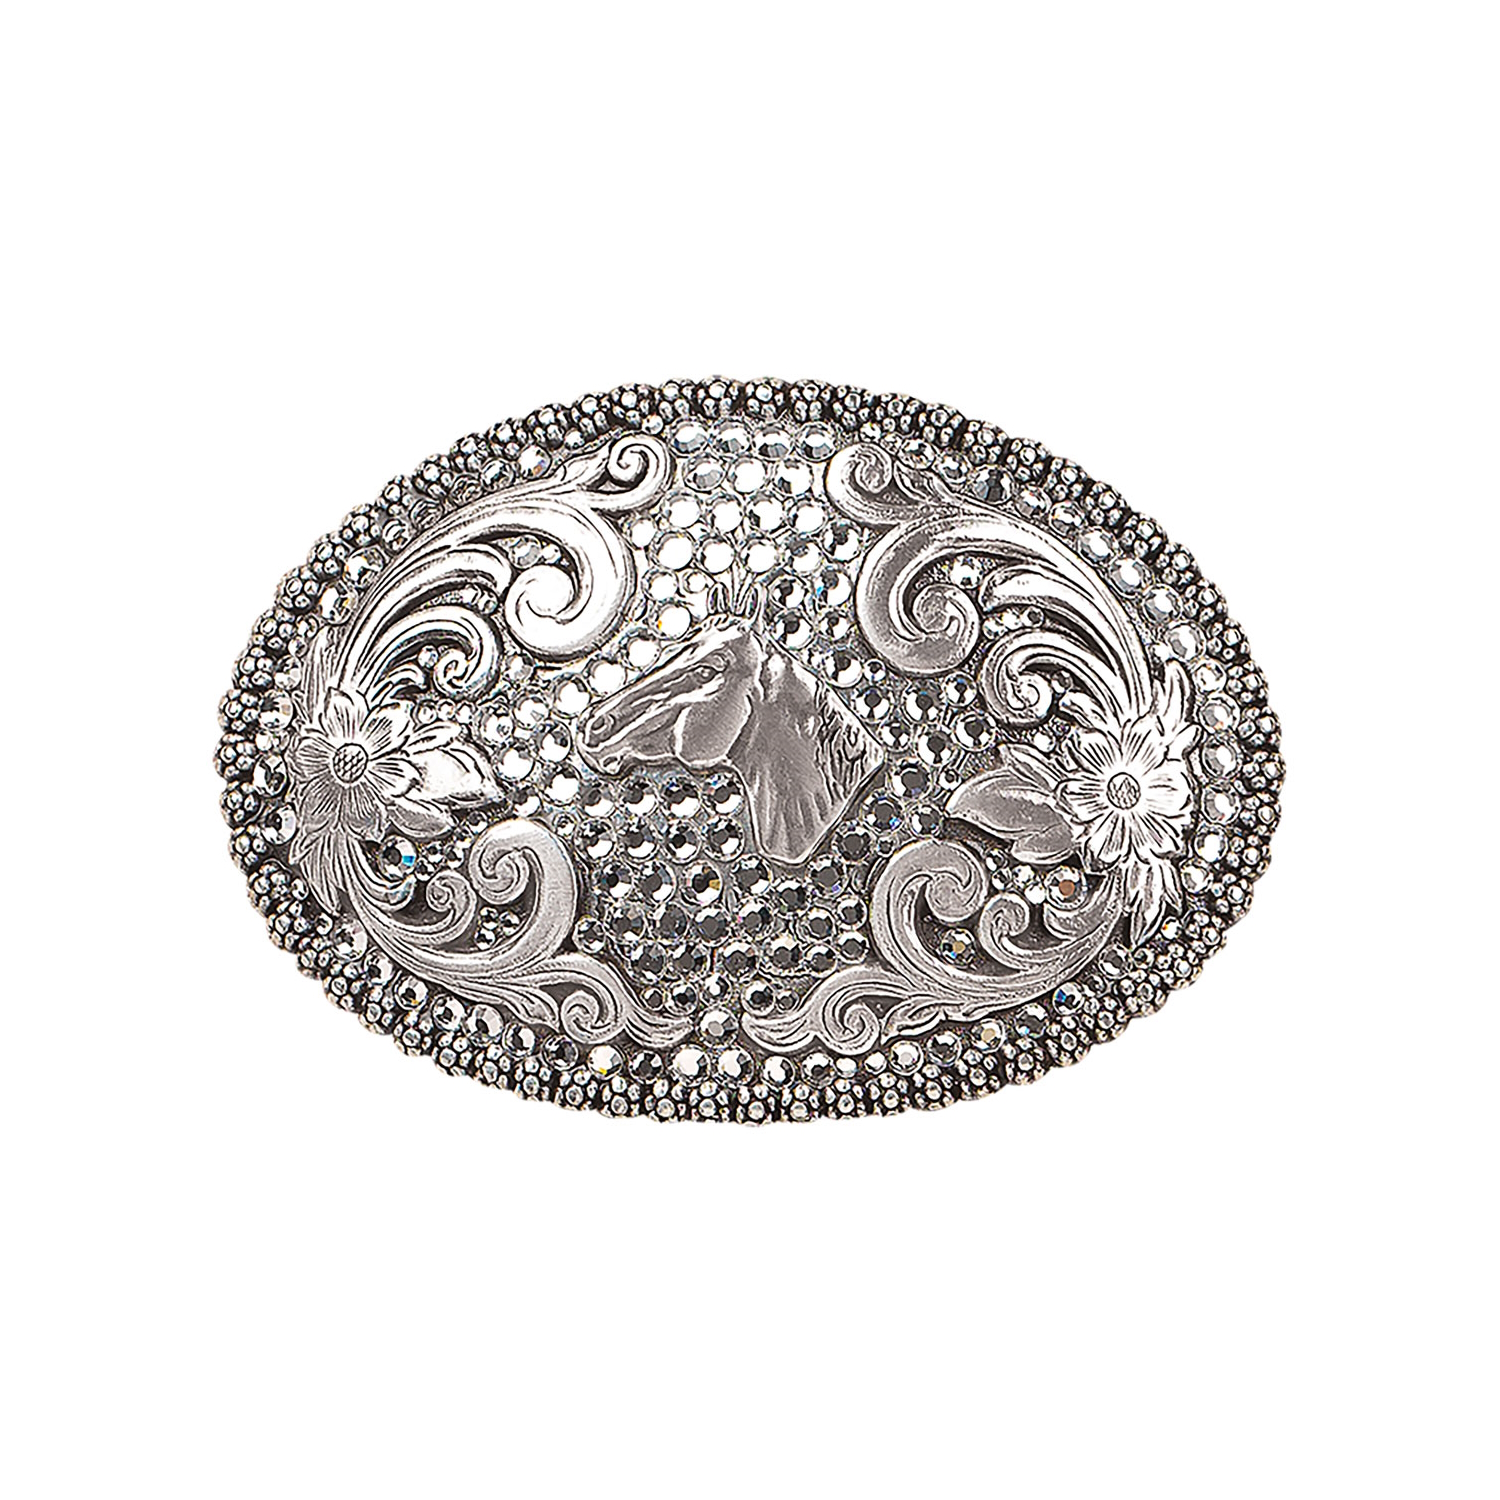 MF-37536 Belt Buckle Silver with Rhinestones and Horsehead